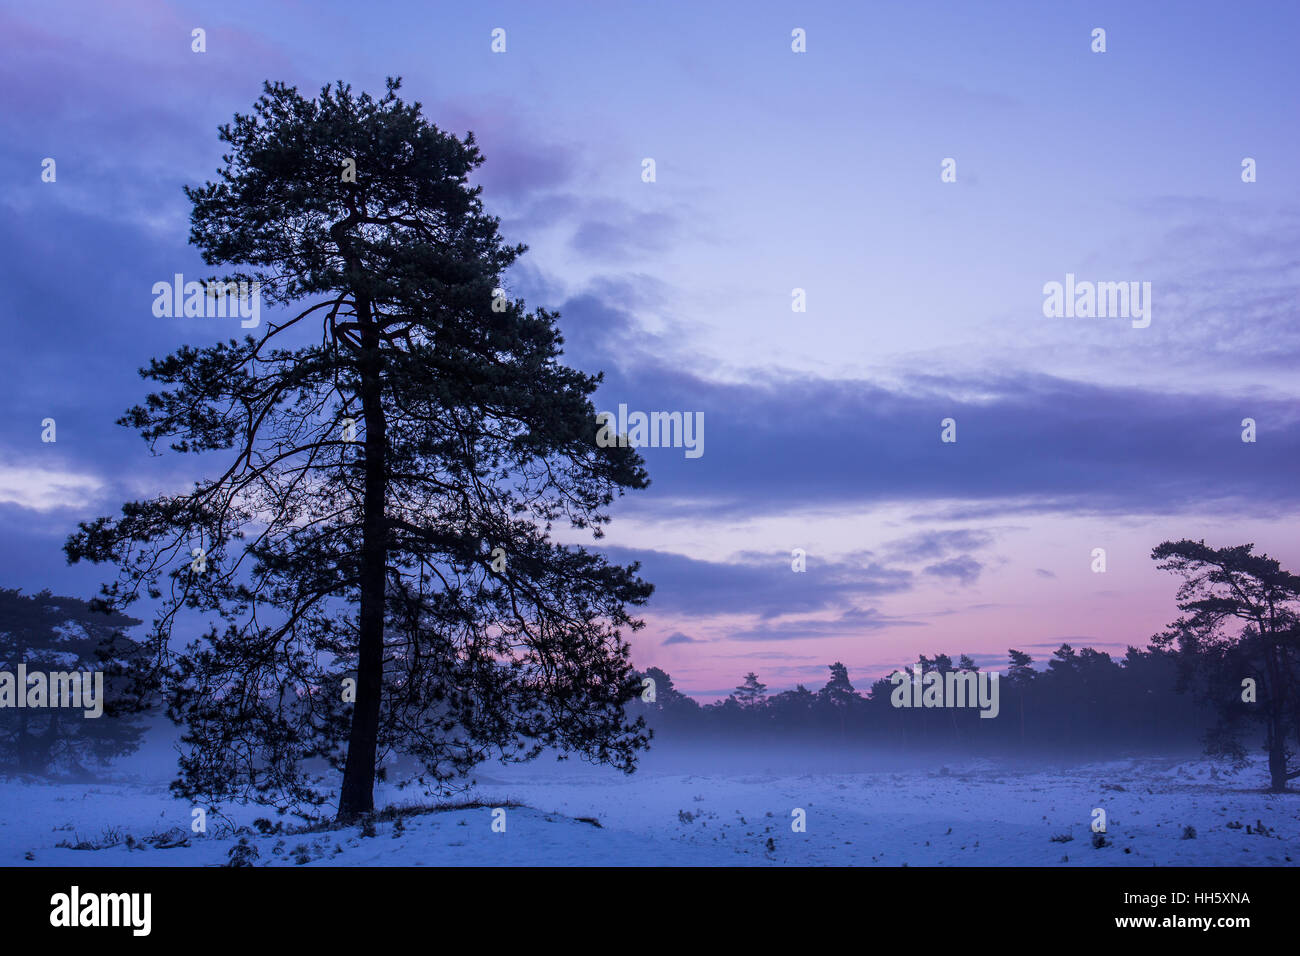 Violet sky during sunset with single tree in the foreground Stock Photo